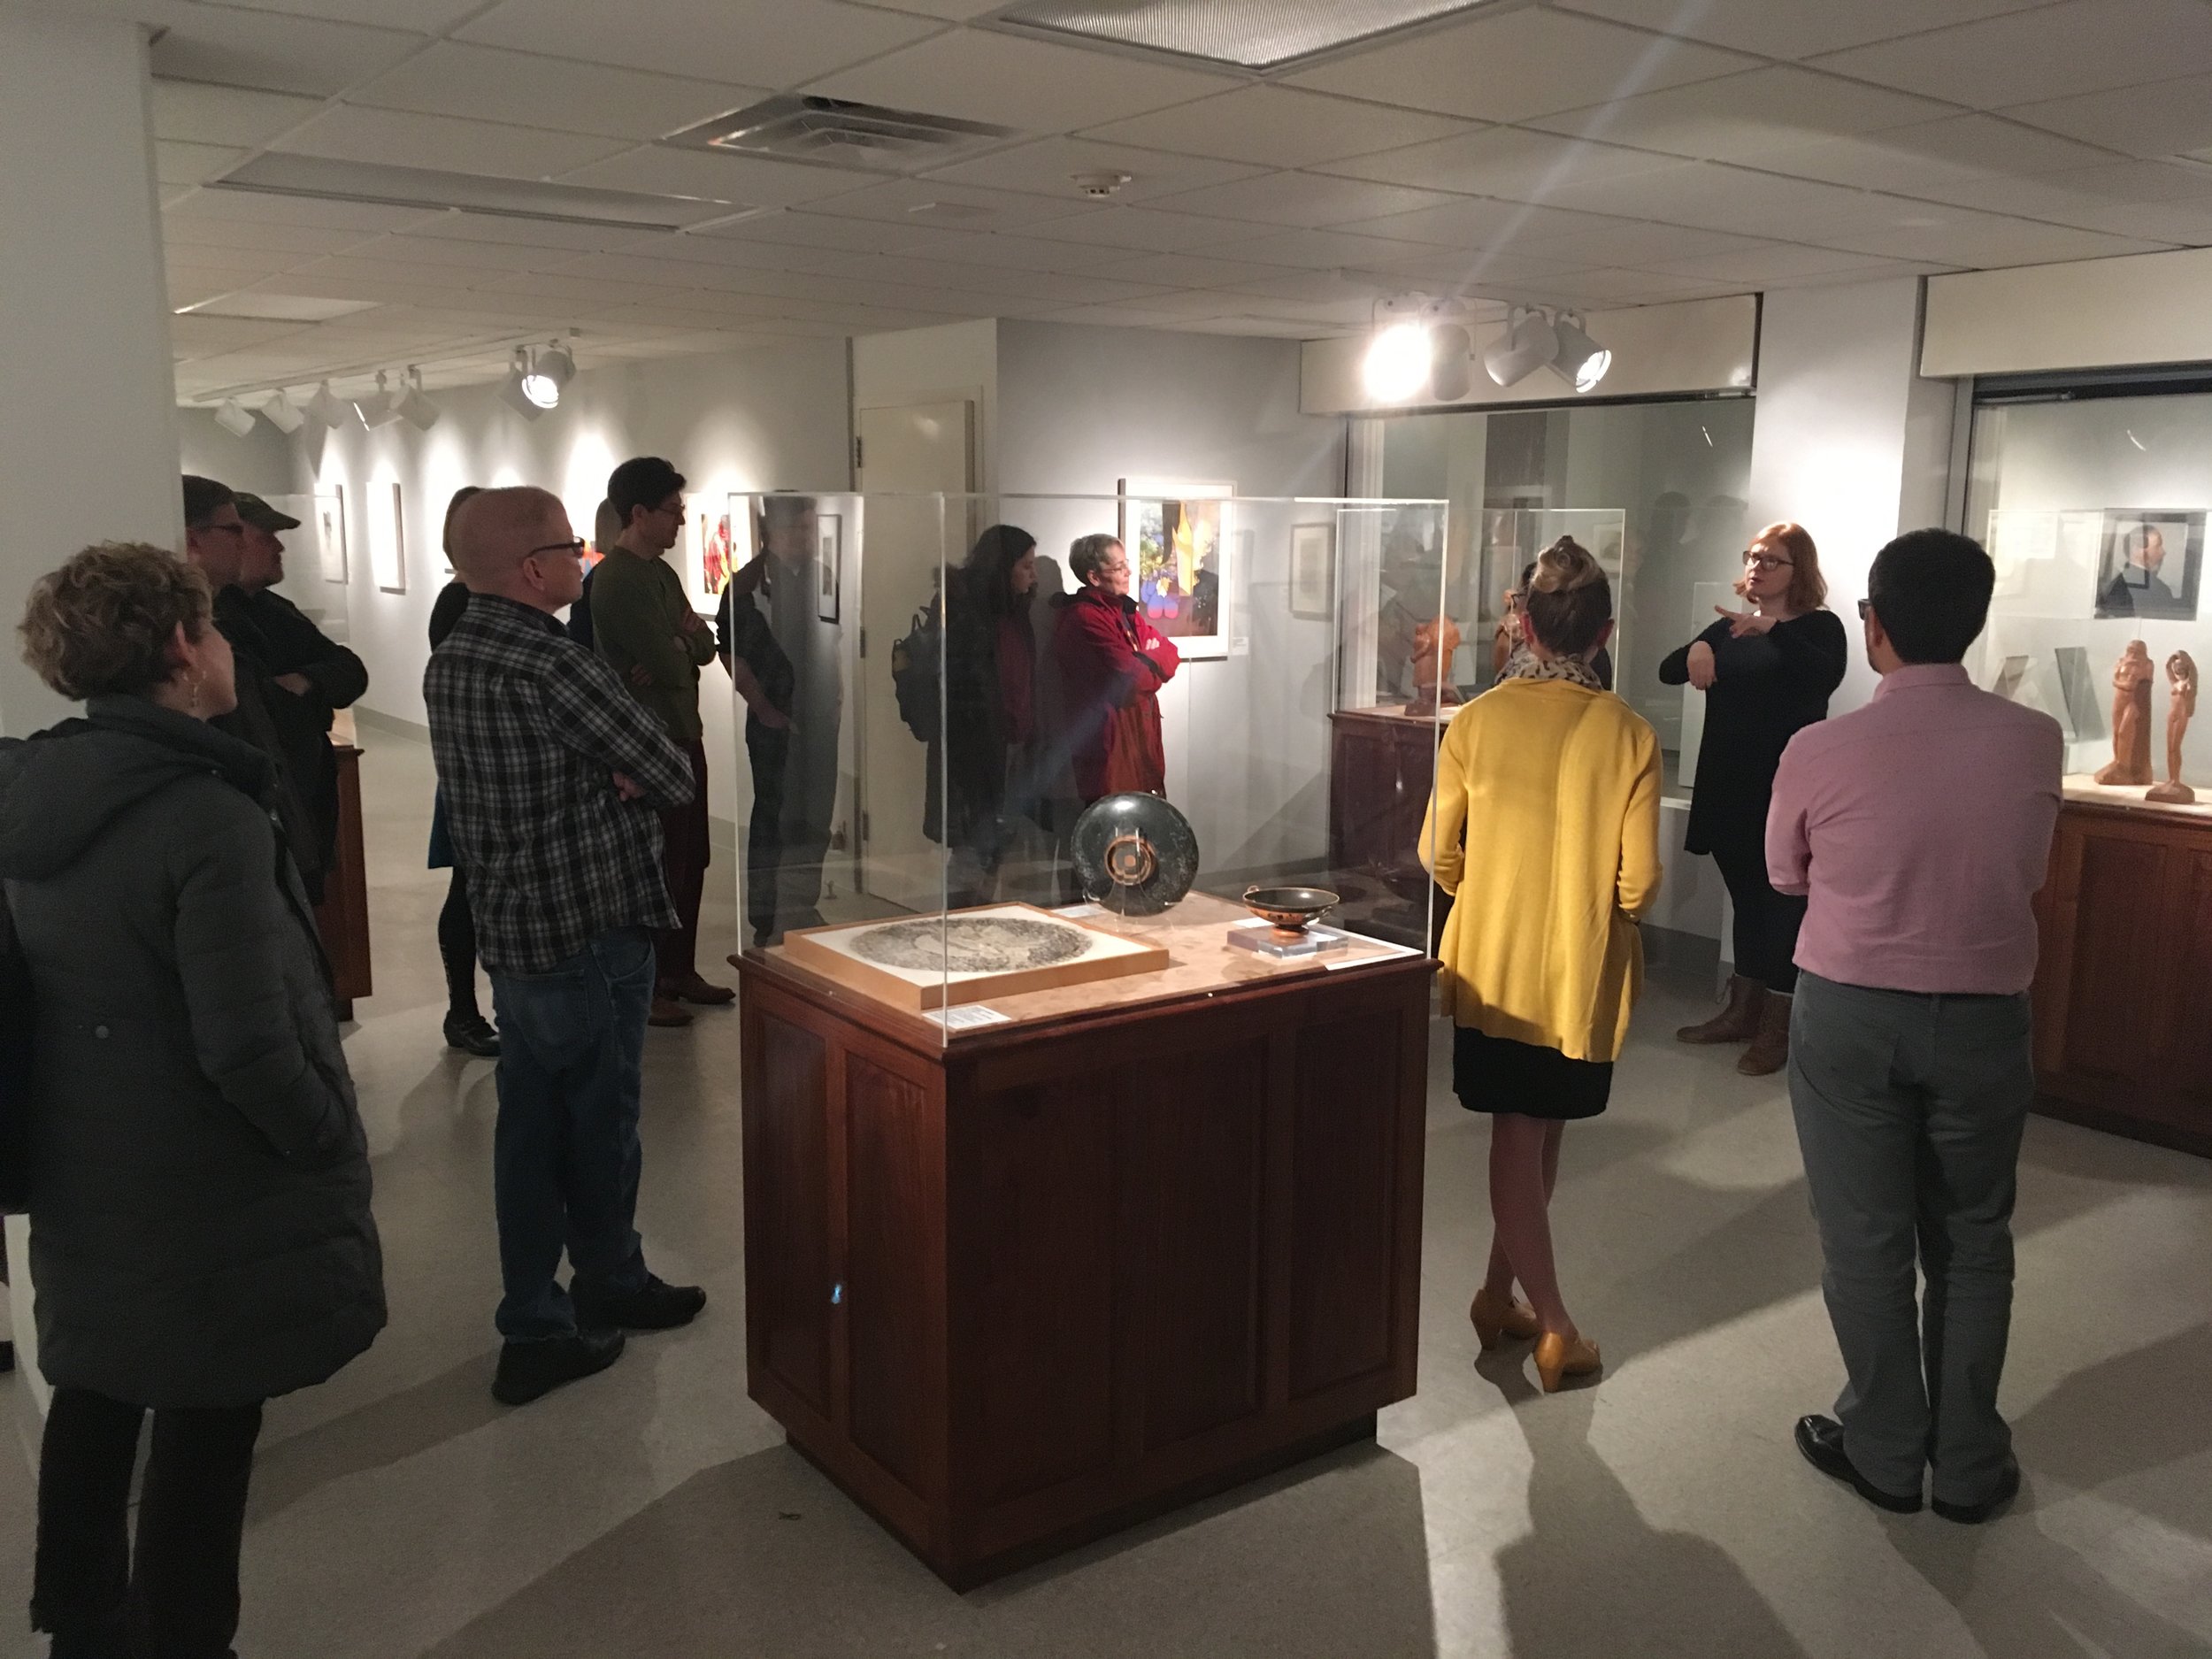  Charles Haag's Art + Archive at Augustana. Tour led by Dr. Kimberly La Palm (Scandinavian Studies) and Lisa Huntsha (Swenson Swedish Immigration Research Center). ASL interpreter: Bambi Suits.  